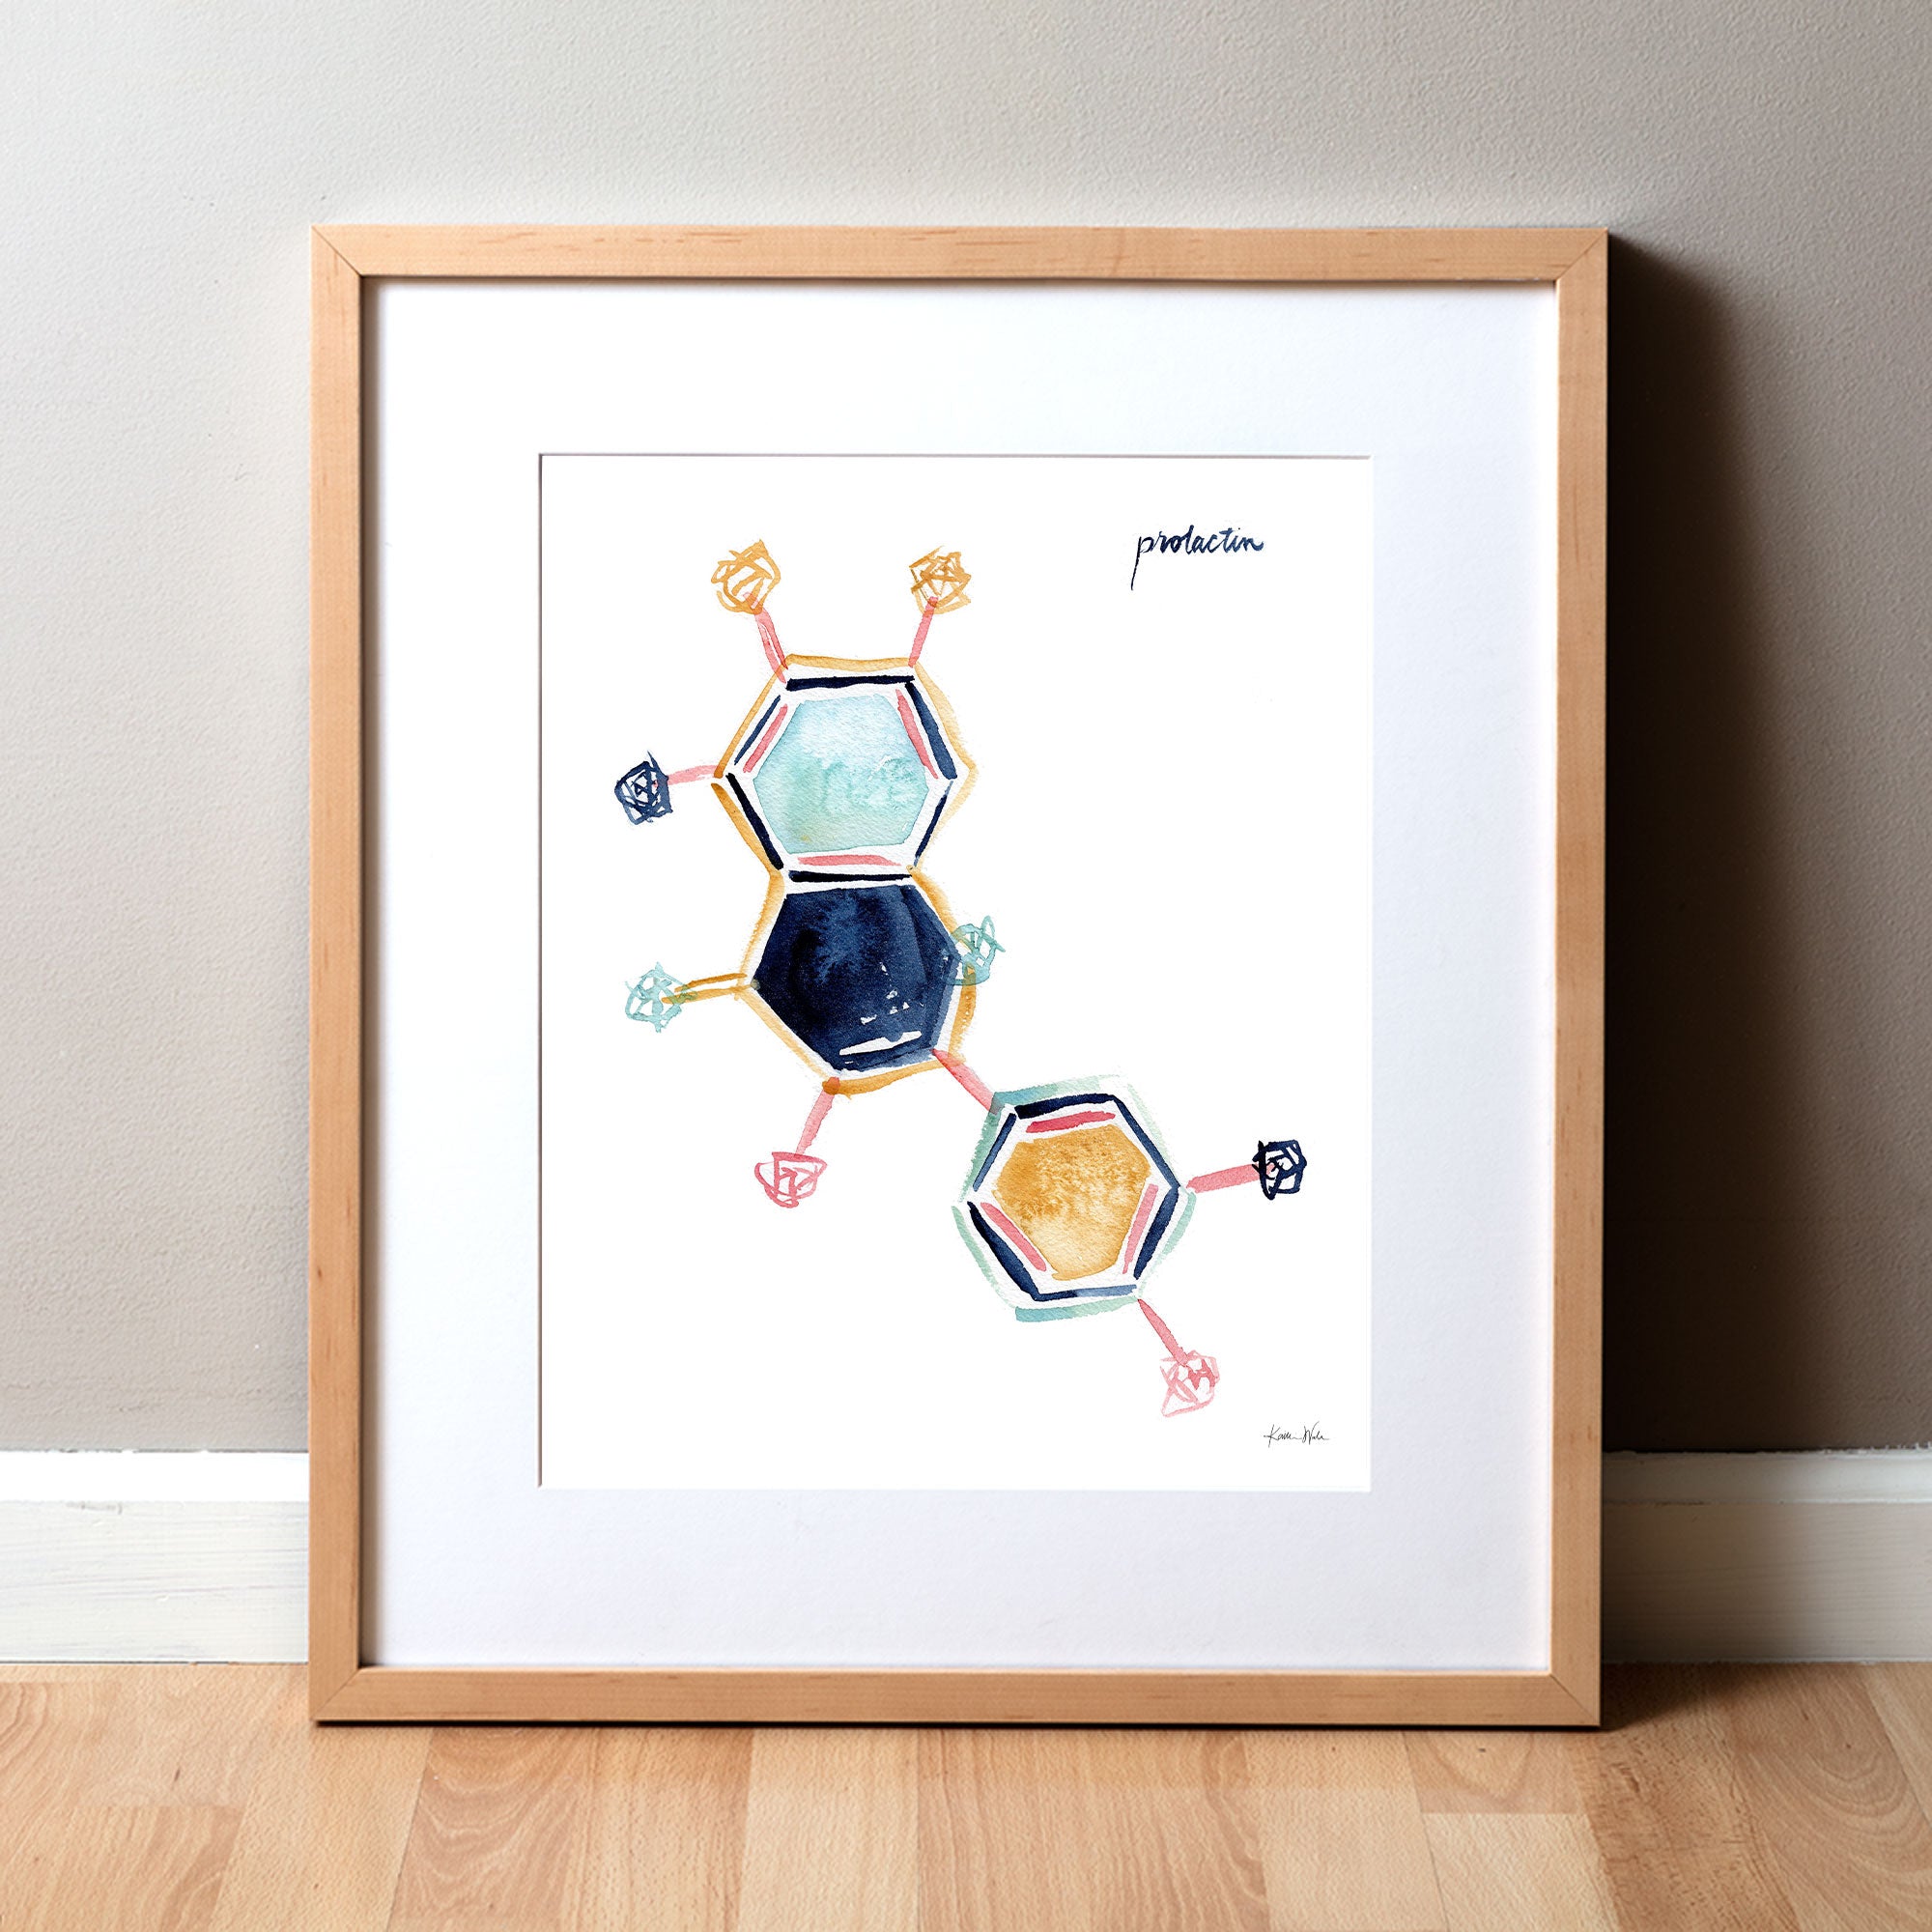 Framed watercolor painting of the prolactin hormone molecular structure.